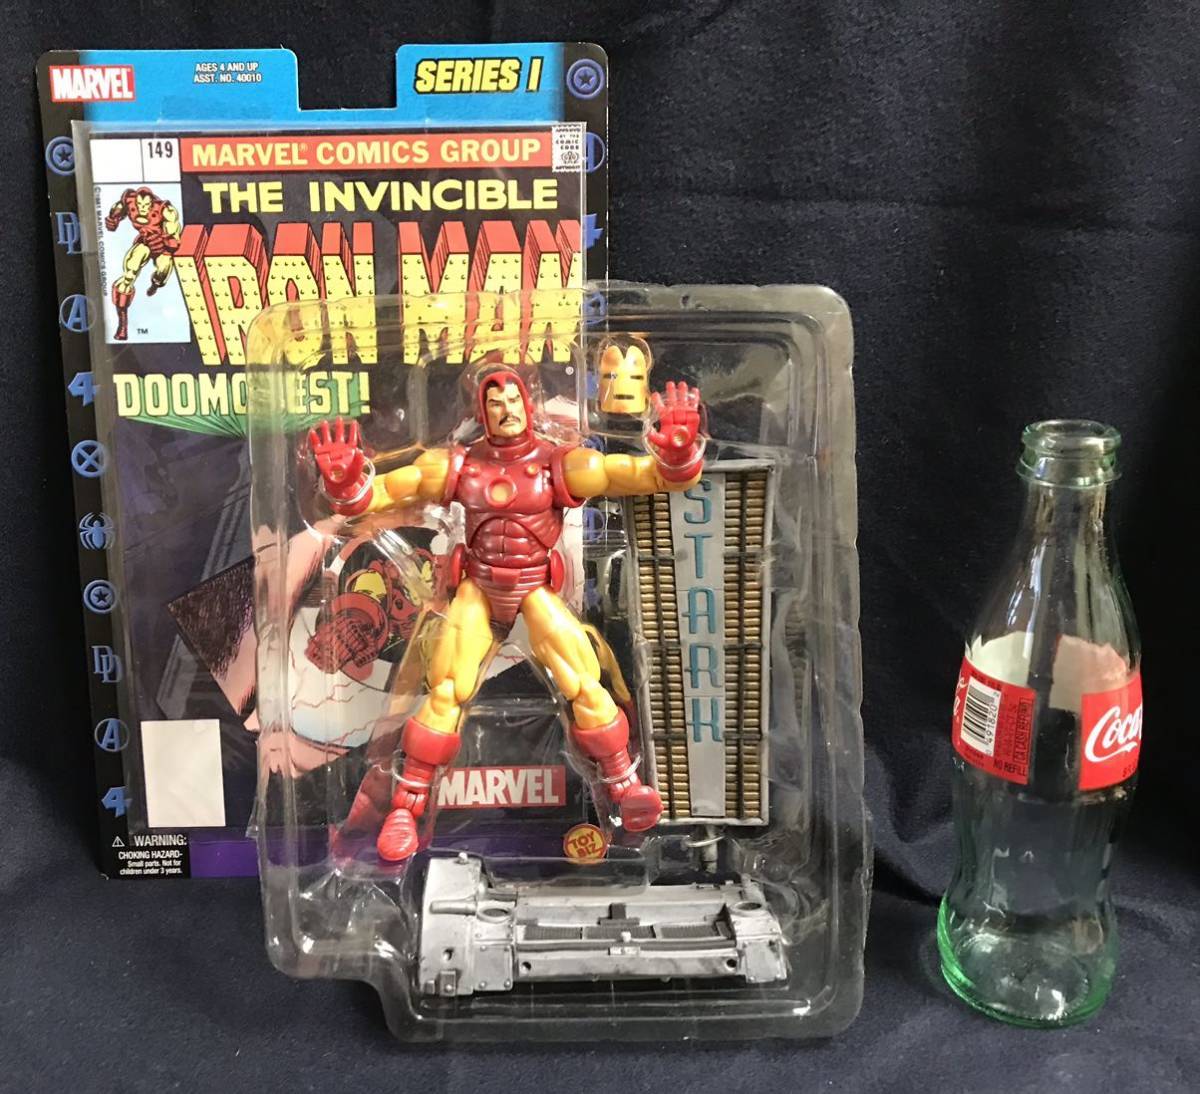 * toy biz[ma- bell Legend / MARVEL LEGENDS ][ IRON MAN / Ironman ]6 -inch figure * as good as new ( pack is breaking the seal ending )*